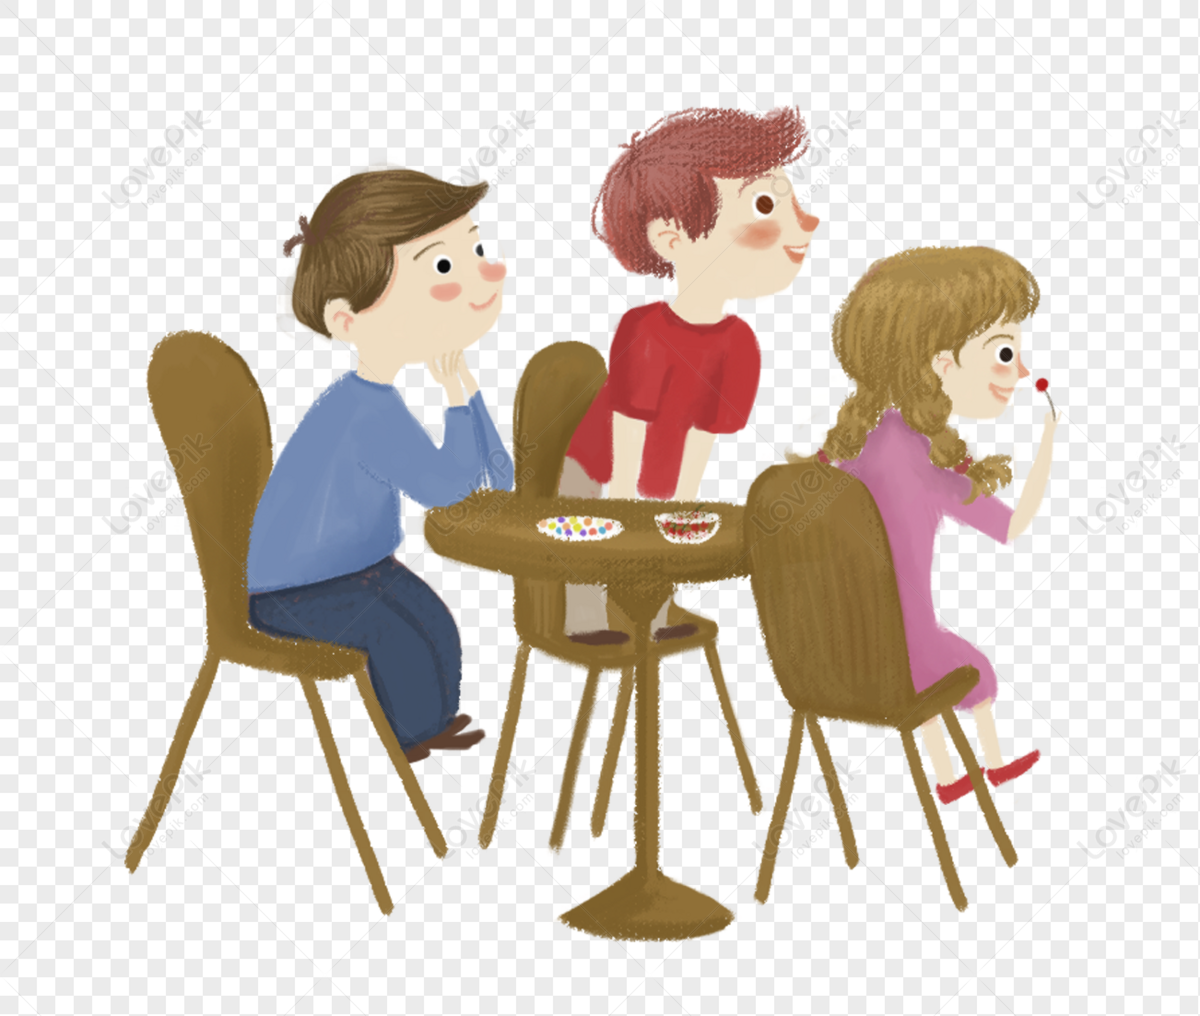 Little Buddy Sitting Together Free PNG And Clipart Image For Free Download  - Lovepik | 400347139